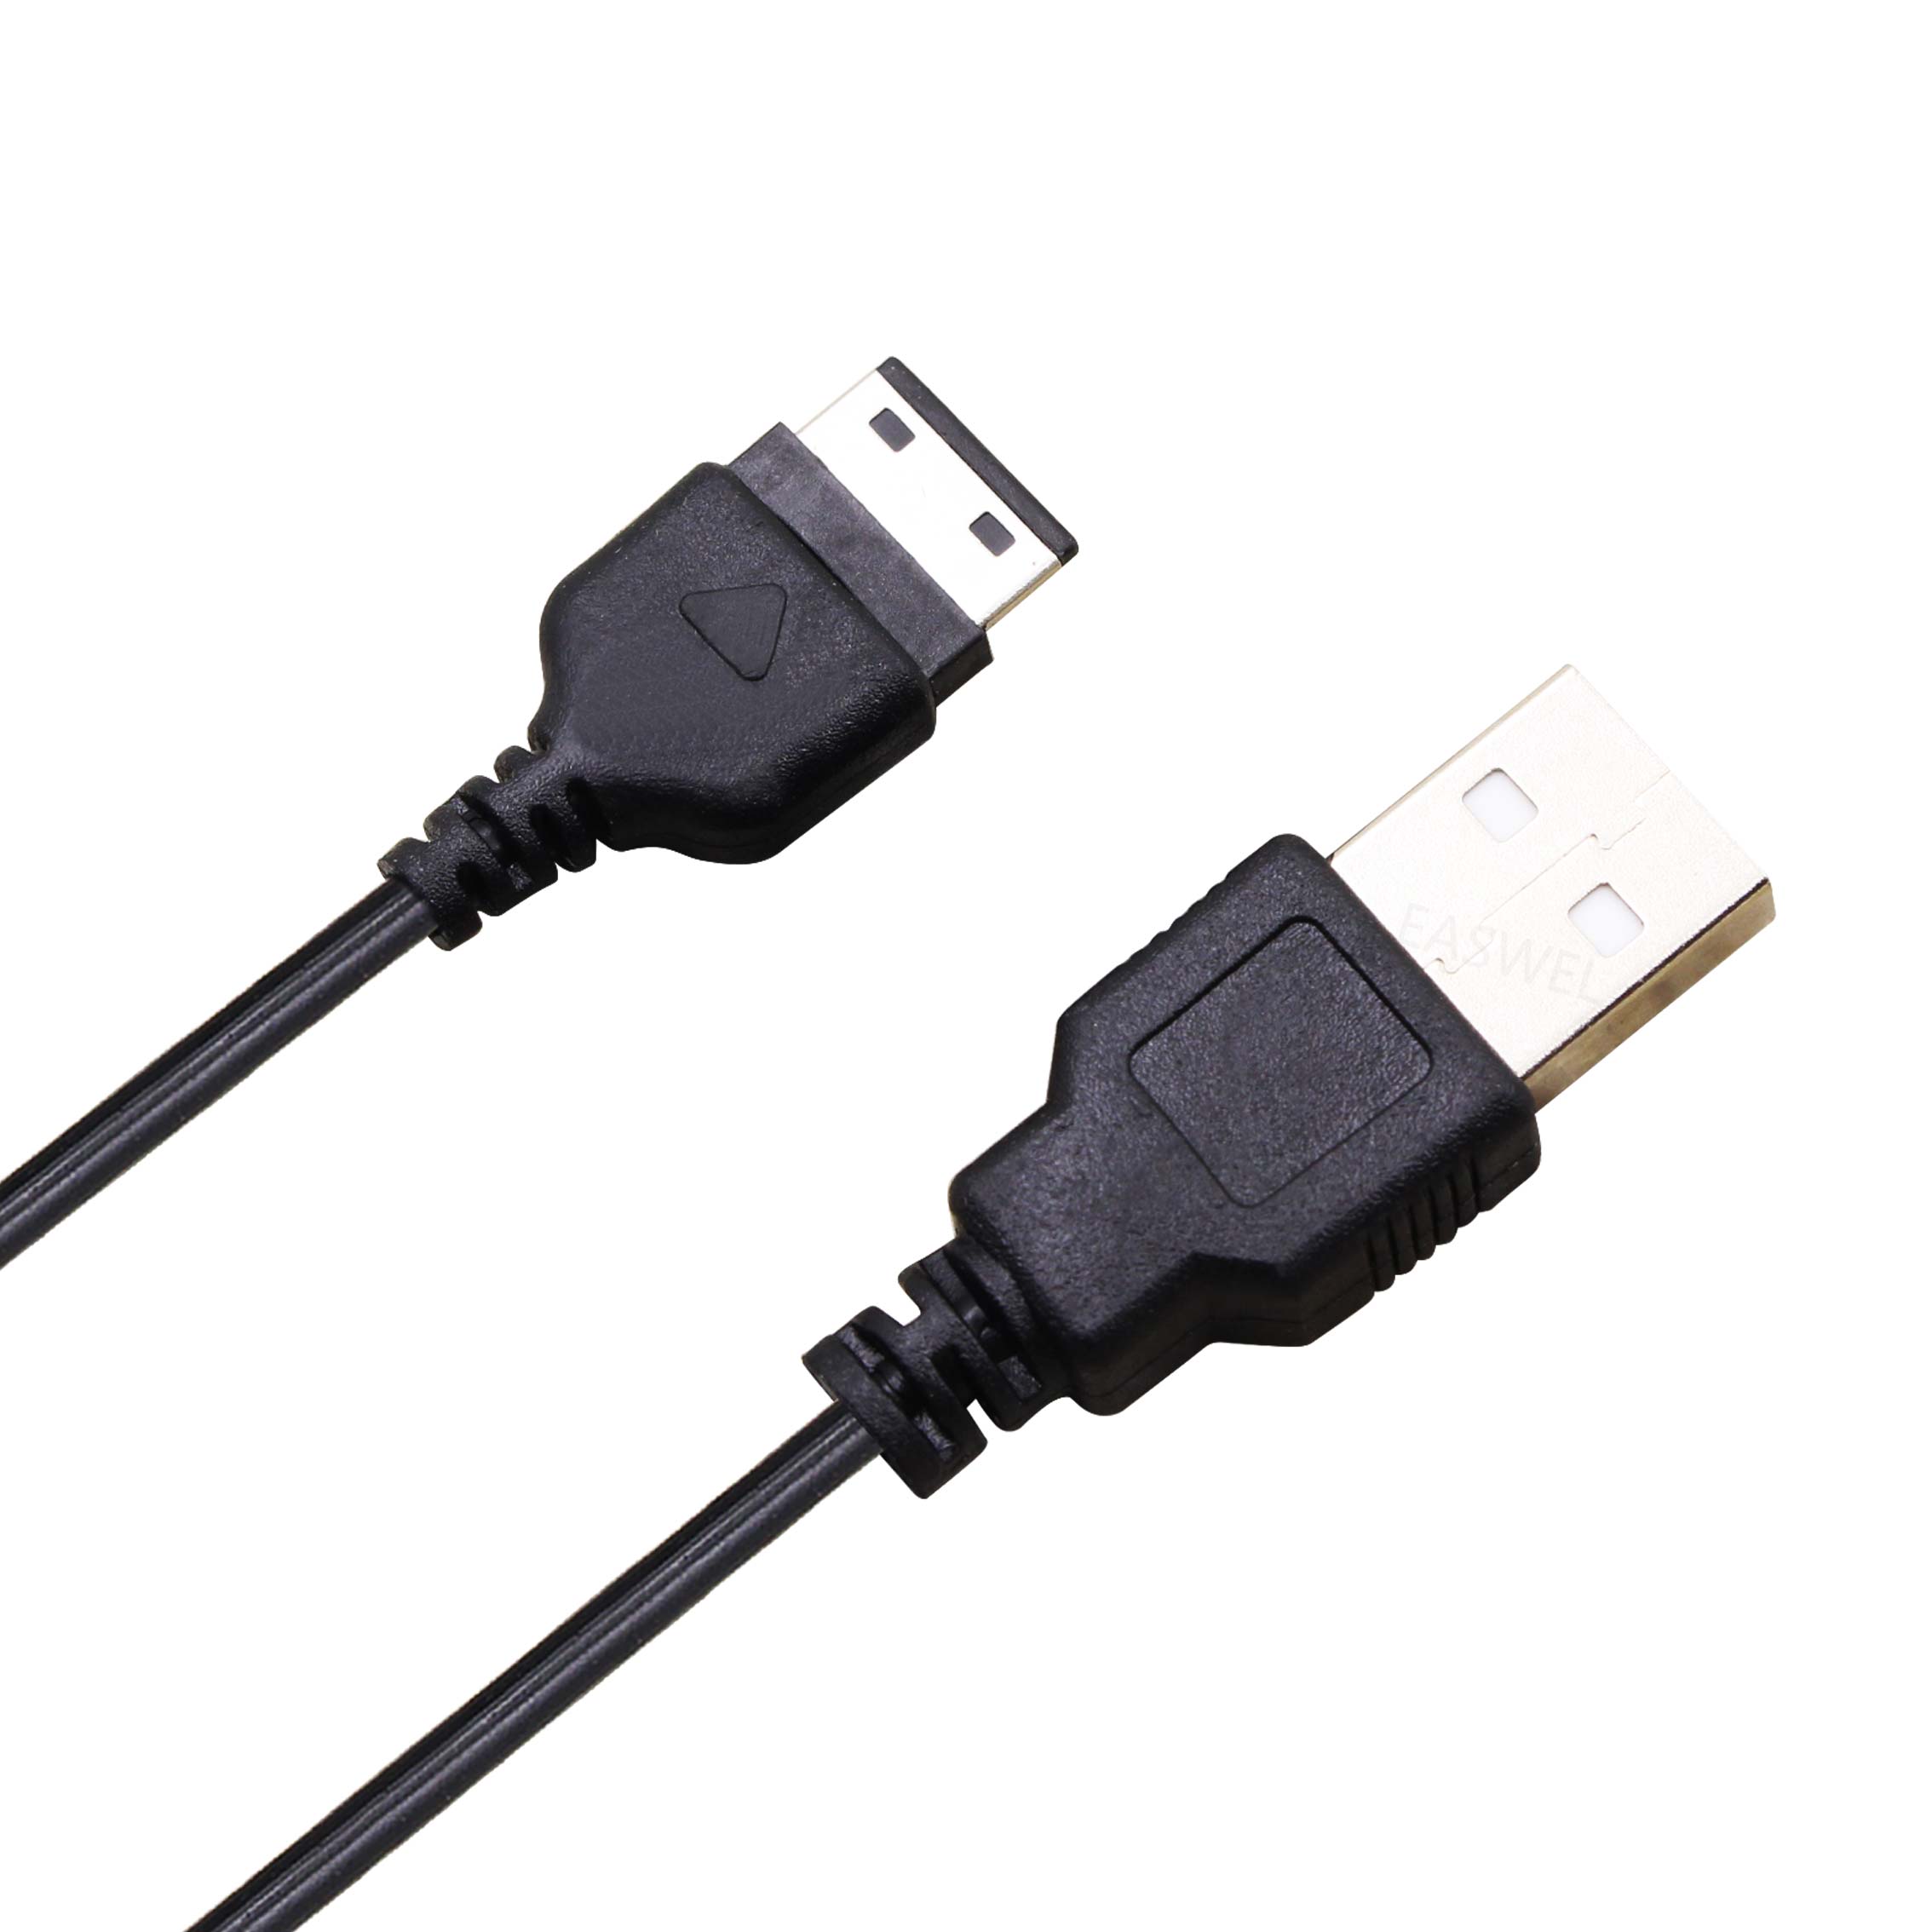 USB Charger Data Cable Koord voor Samsung sgh-m600 sgh-m610 sgh-m620 gt-m7600 gt-b7620 sgh-c140 sgh-c180 sgh-c270 gt-i7500